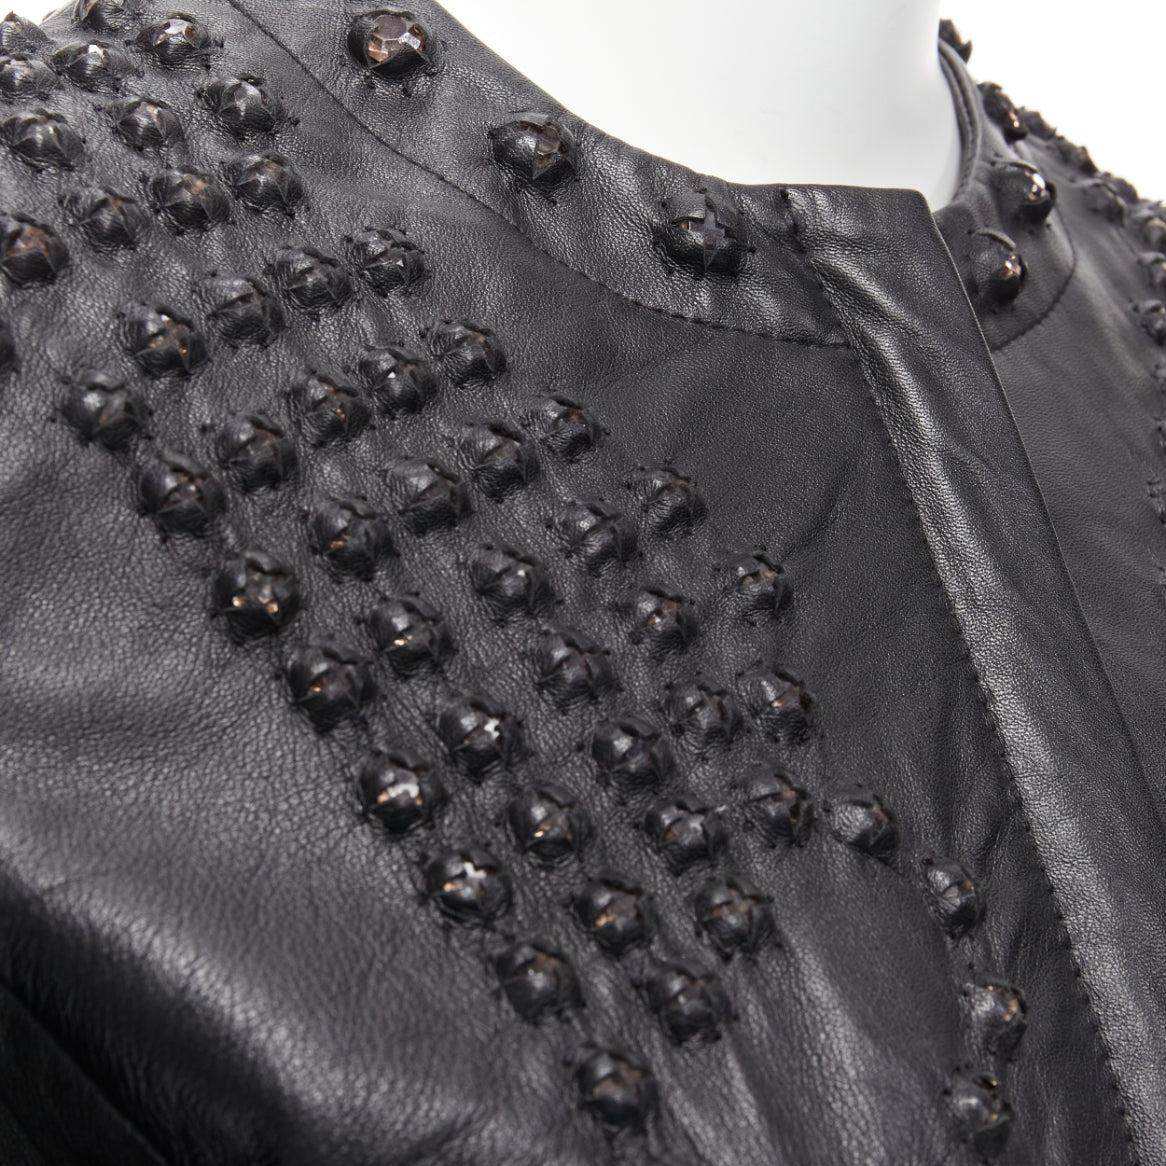 GIVENCHY black sheepskin clear crystal studded cropped leather jacket FR38 M
Reference: DYTG/A00025
Brand: Givenchy
Designer: Riccardo Tisci
Material: Leather
Color: Clear, Black
Pattern: Studded
Closure: Zip
Lining: Black Fabric
Extra Details: